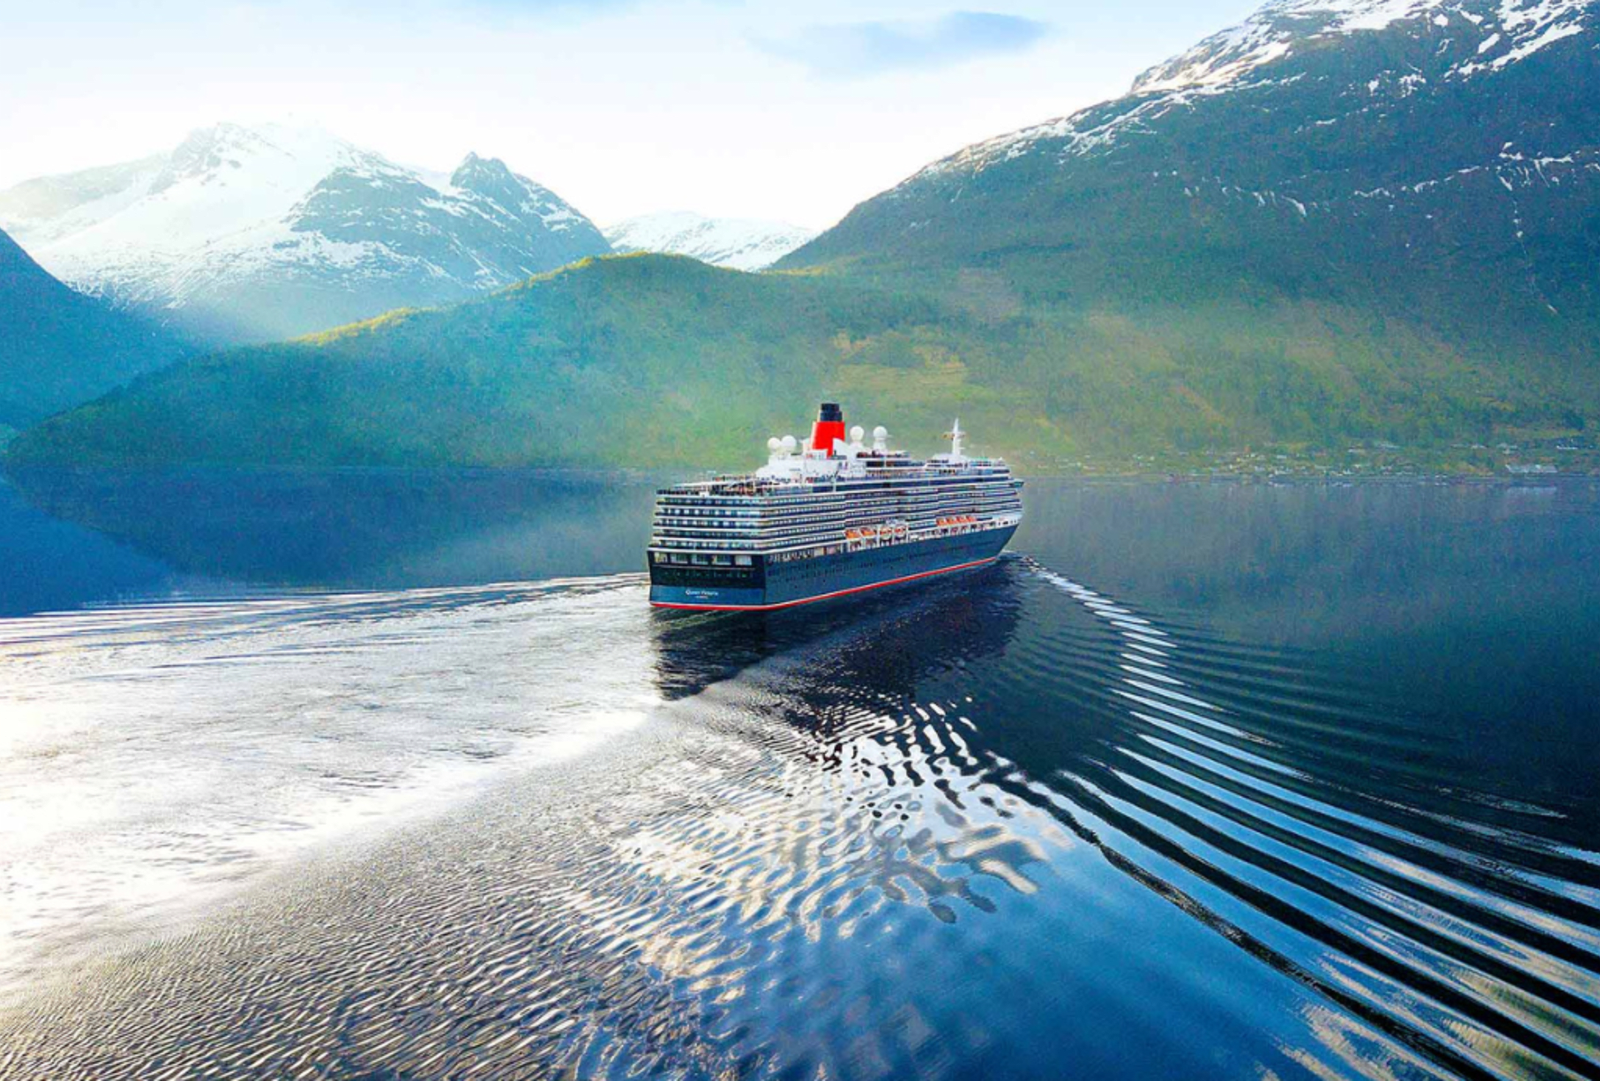 A cruise ship sails on calm waters with a mountainous background